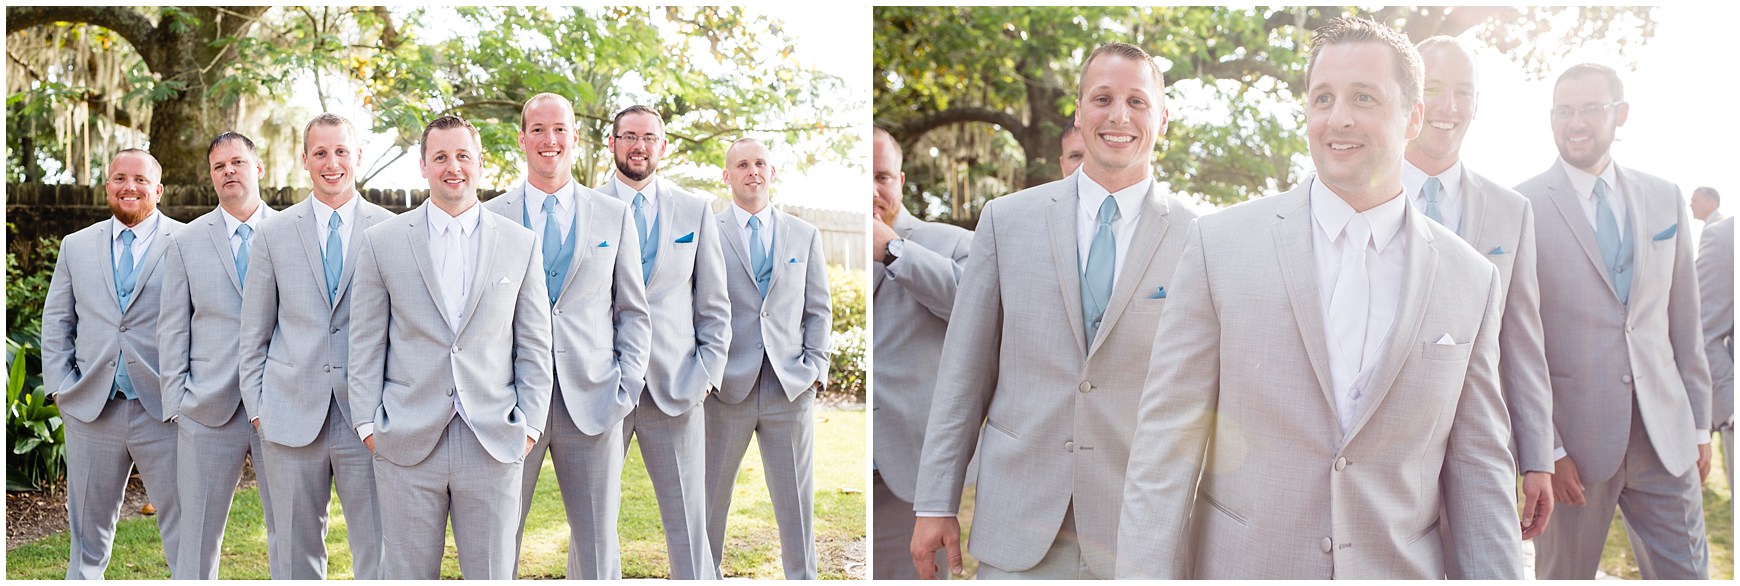 Wedding at Destin Bay House_Indie Pearl Photography_Katie and Andrew_0049.jpg